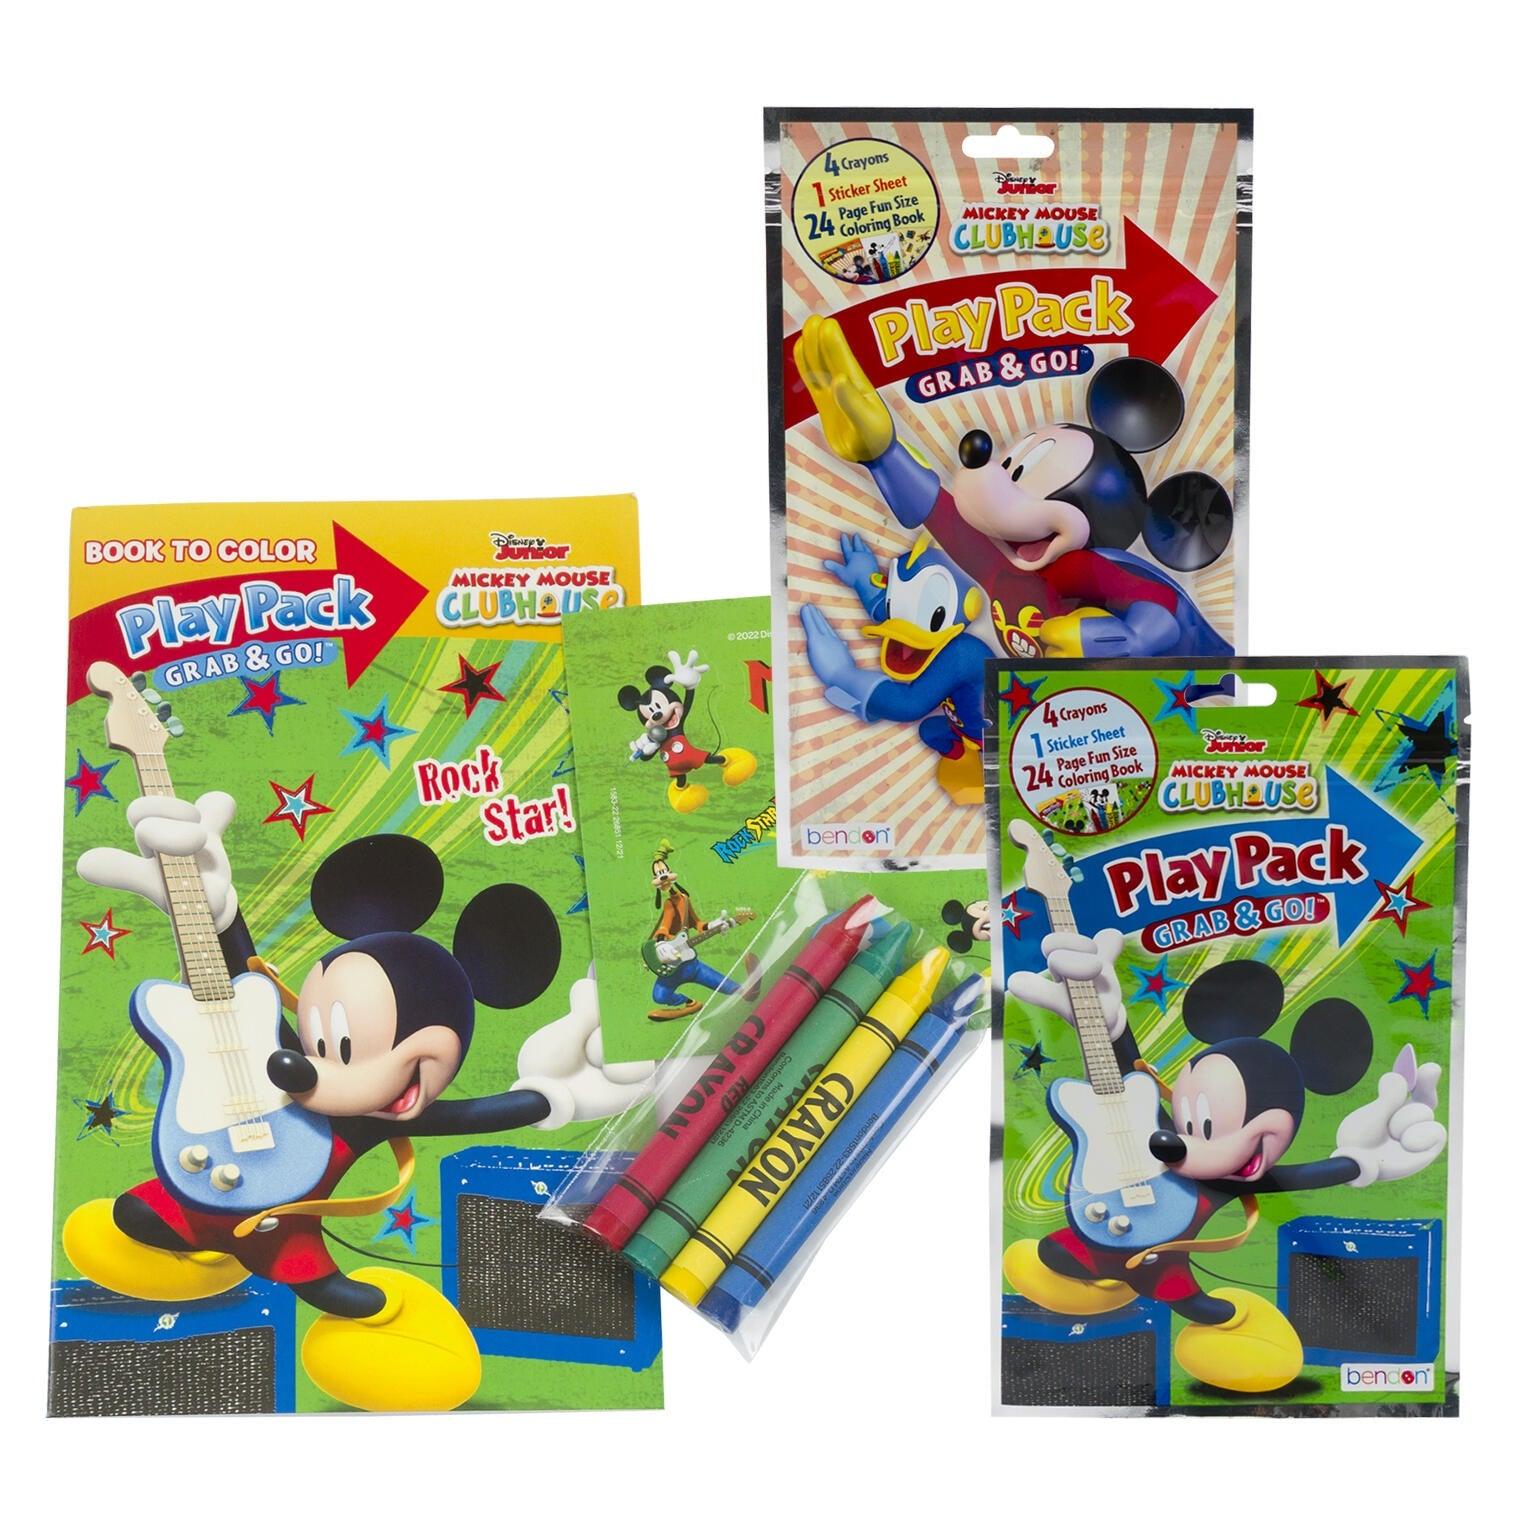 Mickey Mouse Club House Play Pack